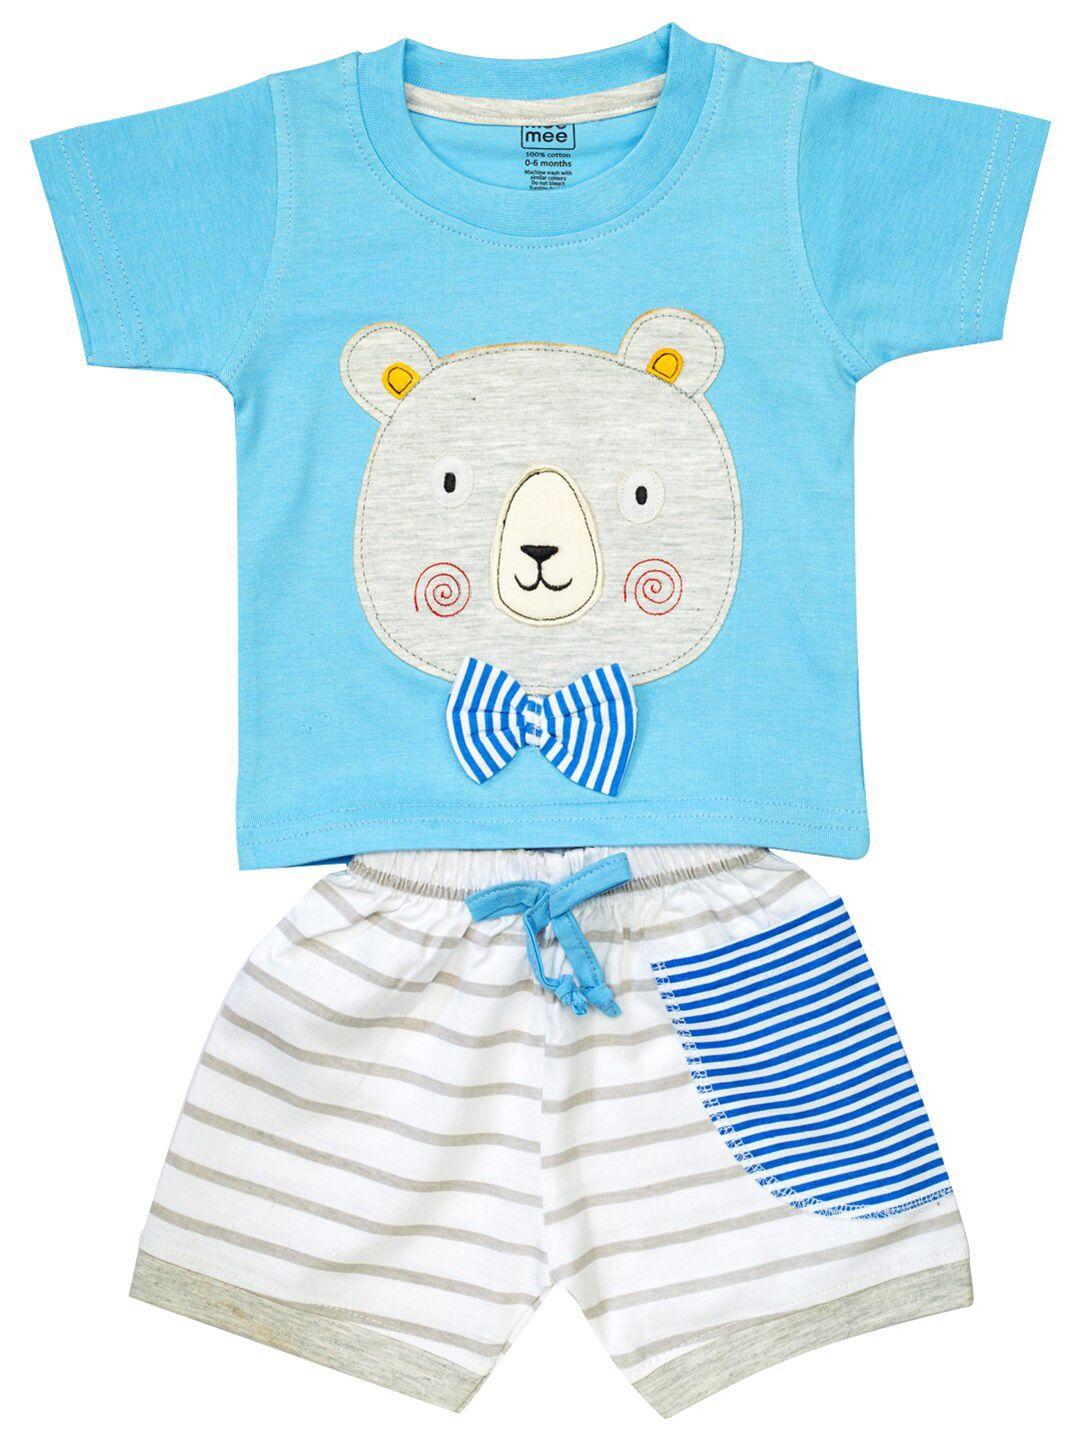 meemee infant boys blue & white printed pure cotton t-shirt with shorts